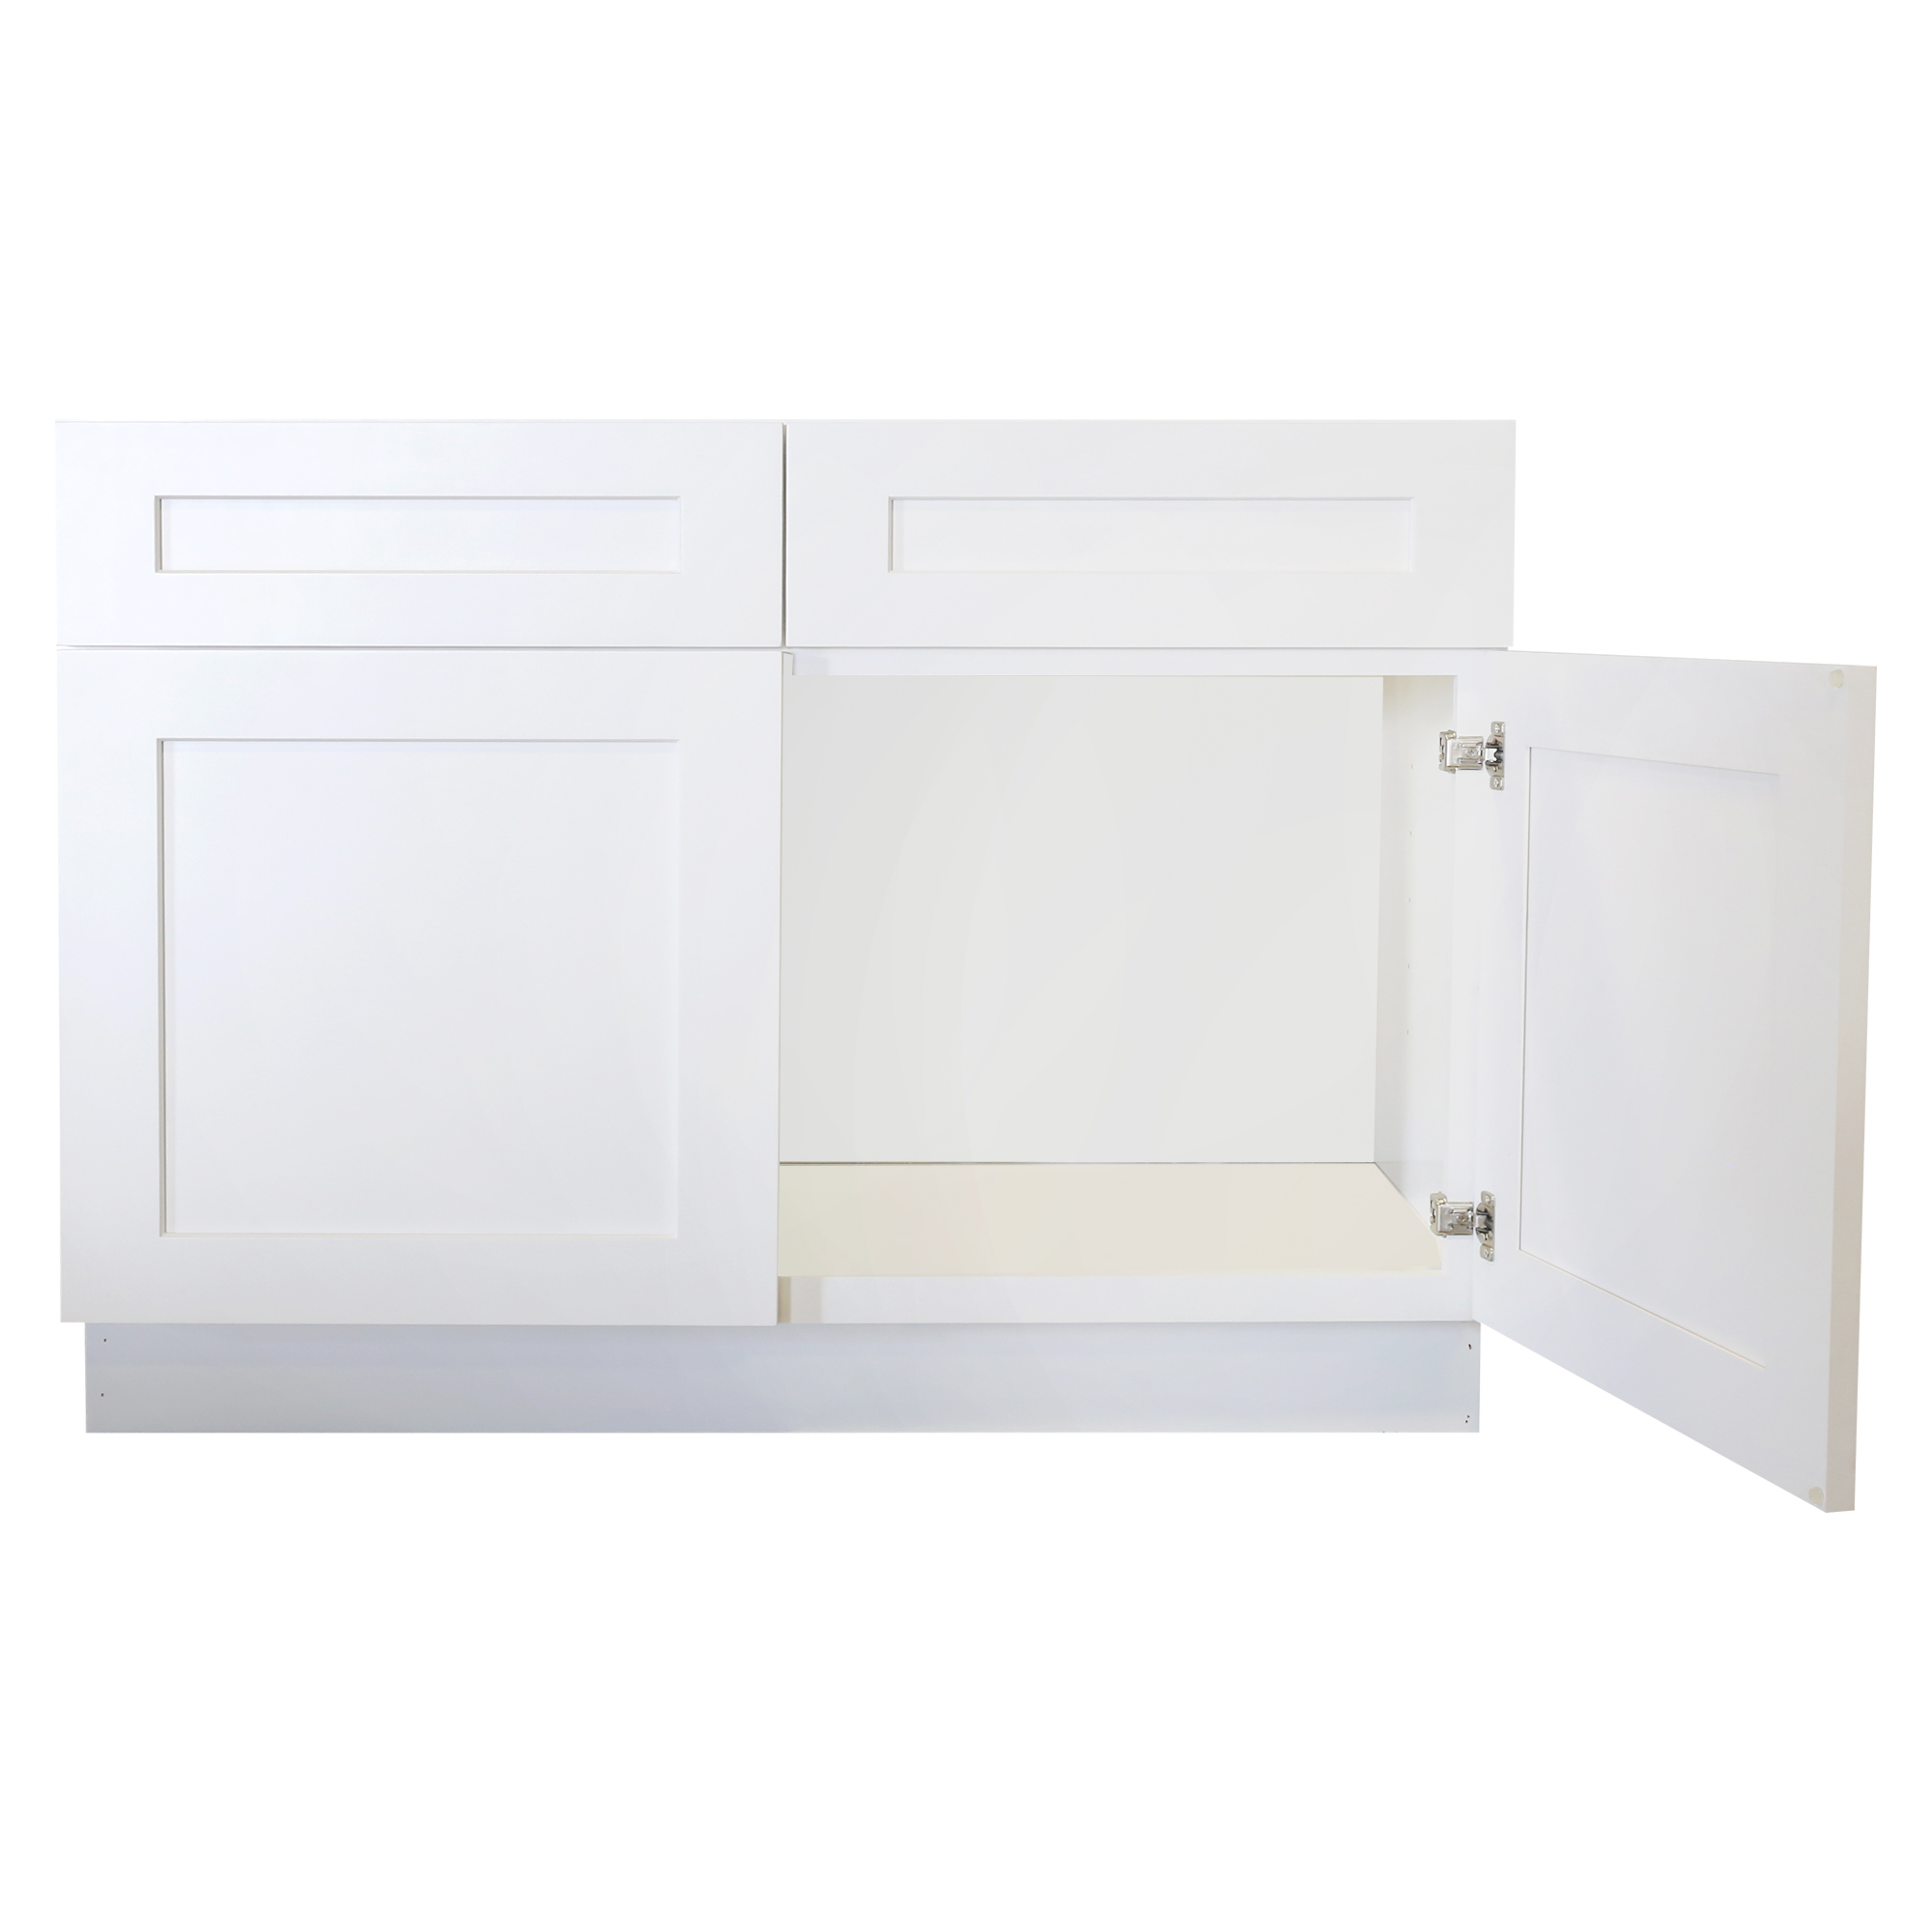 Ready to Assemble 36x34.5x24 in. Shaker Sink Base Cabinet with 2 Doors in White